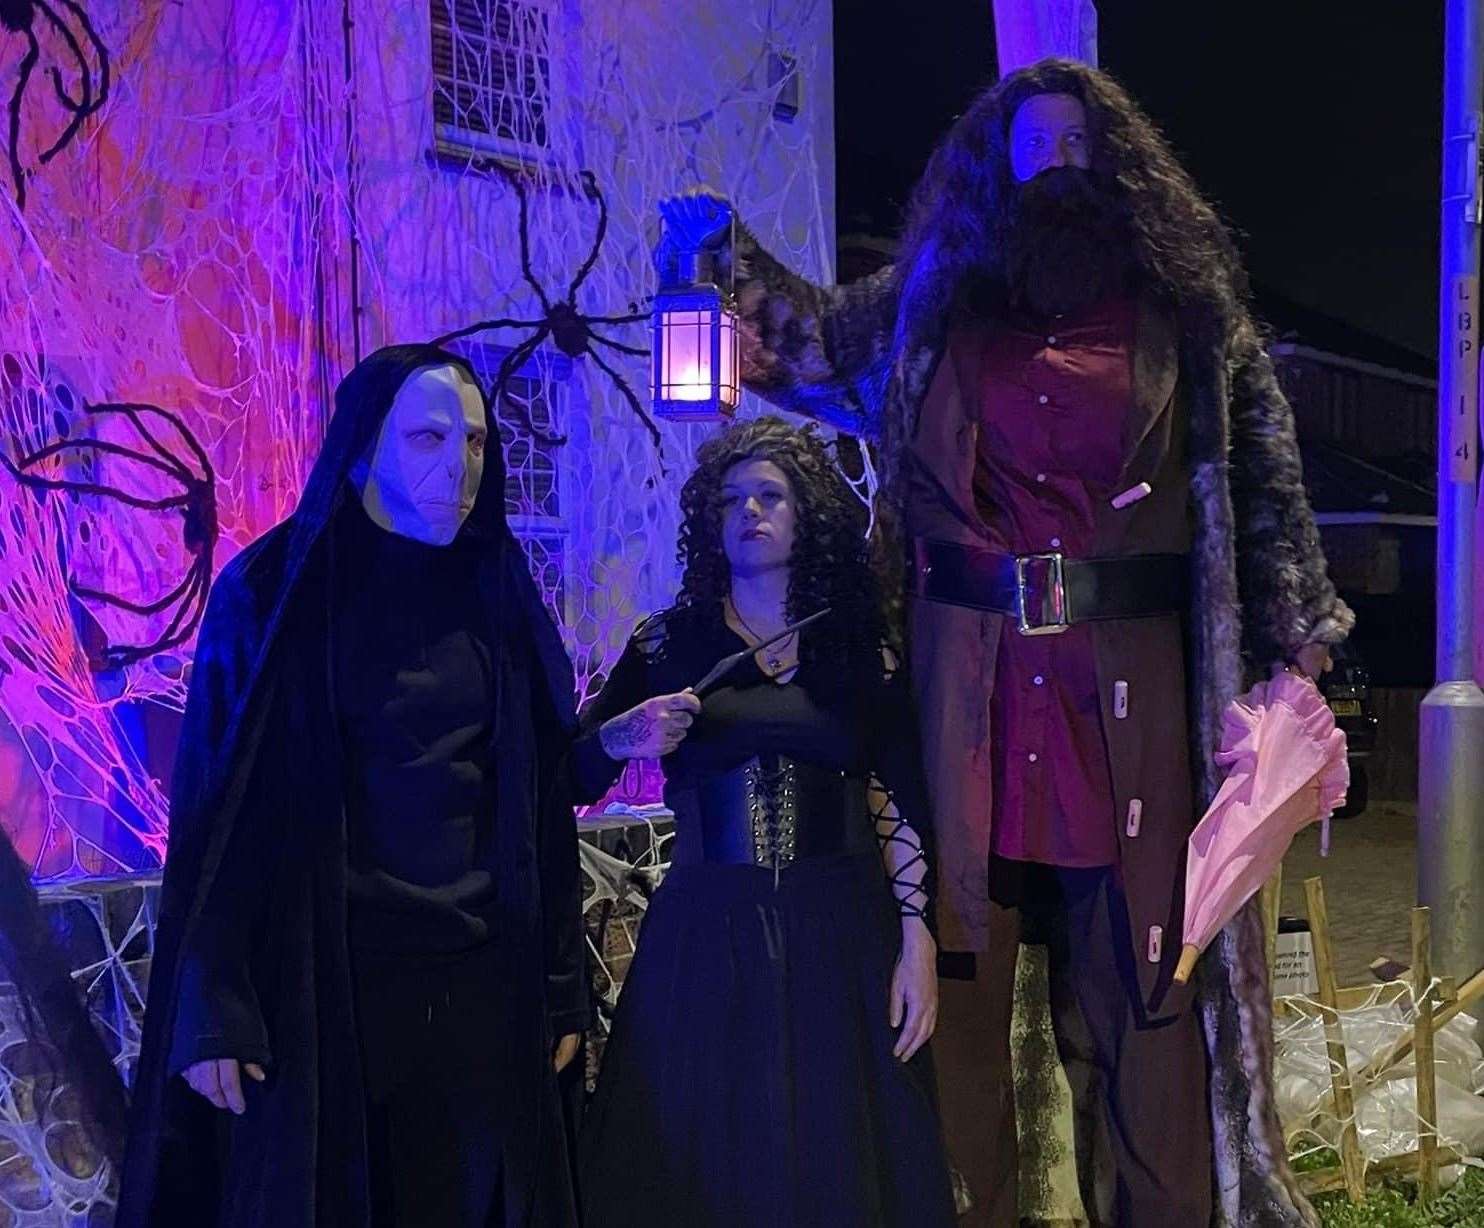 Kieron King, dressed as Hagrid, right, with fellow Harry Potter characters Lord Voldemort, left, and Bellatrix Lestrange. Picture: Kieron King